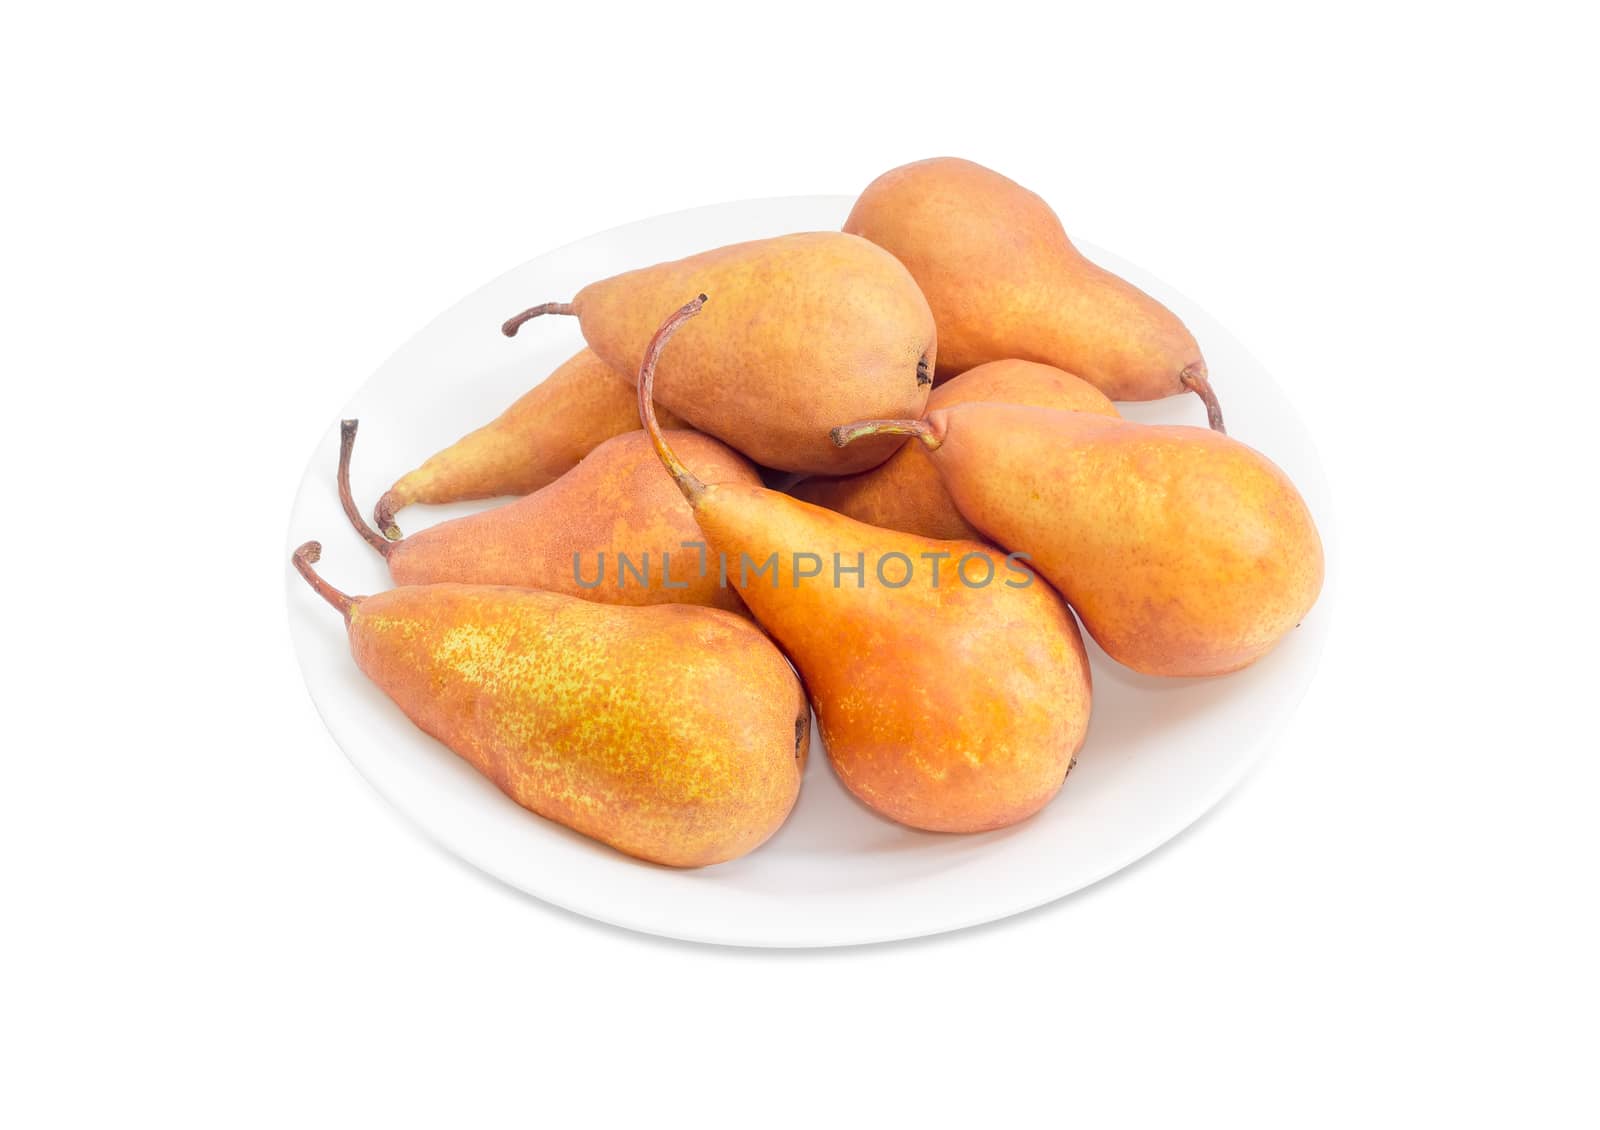 Several ripe yellow and light brown European pears of autumn variety Bere Bosc on a white dish on a white background
